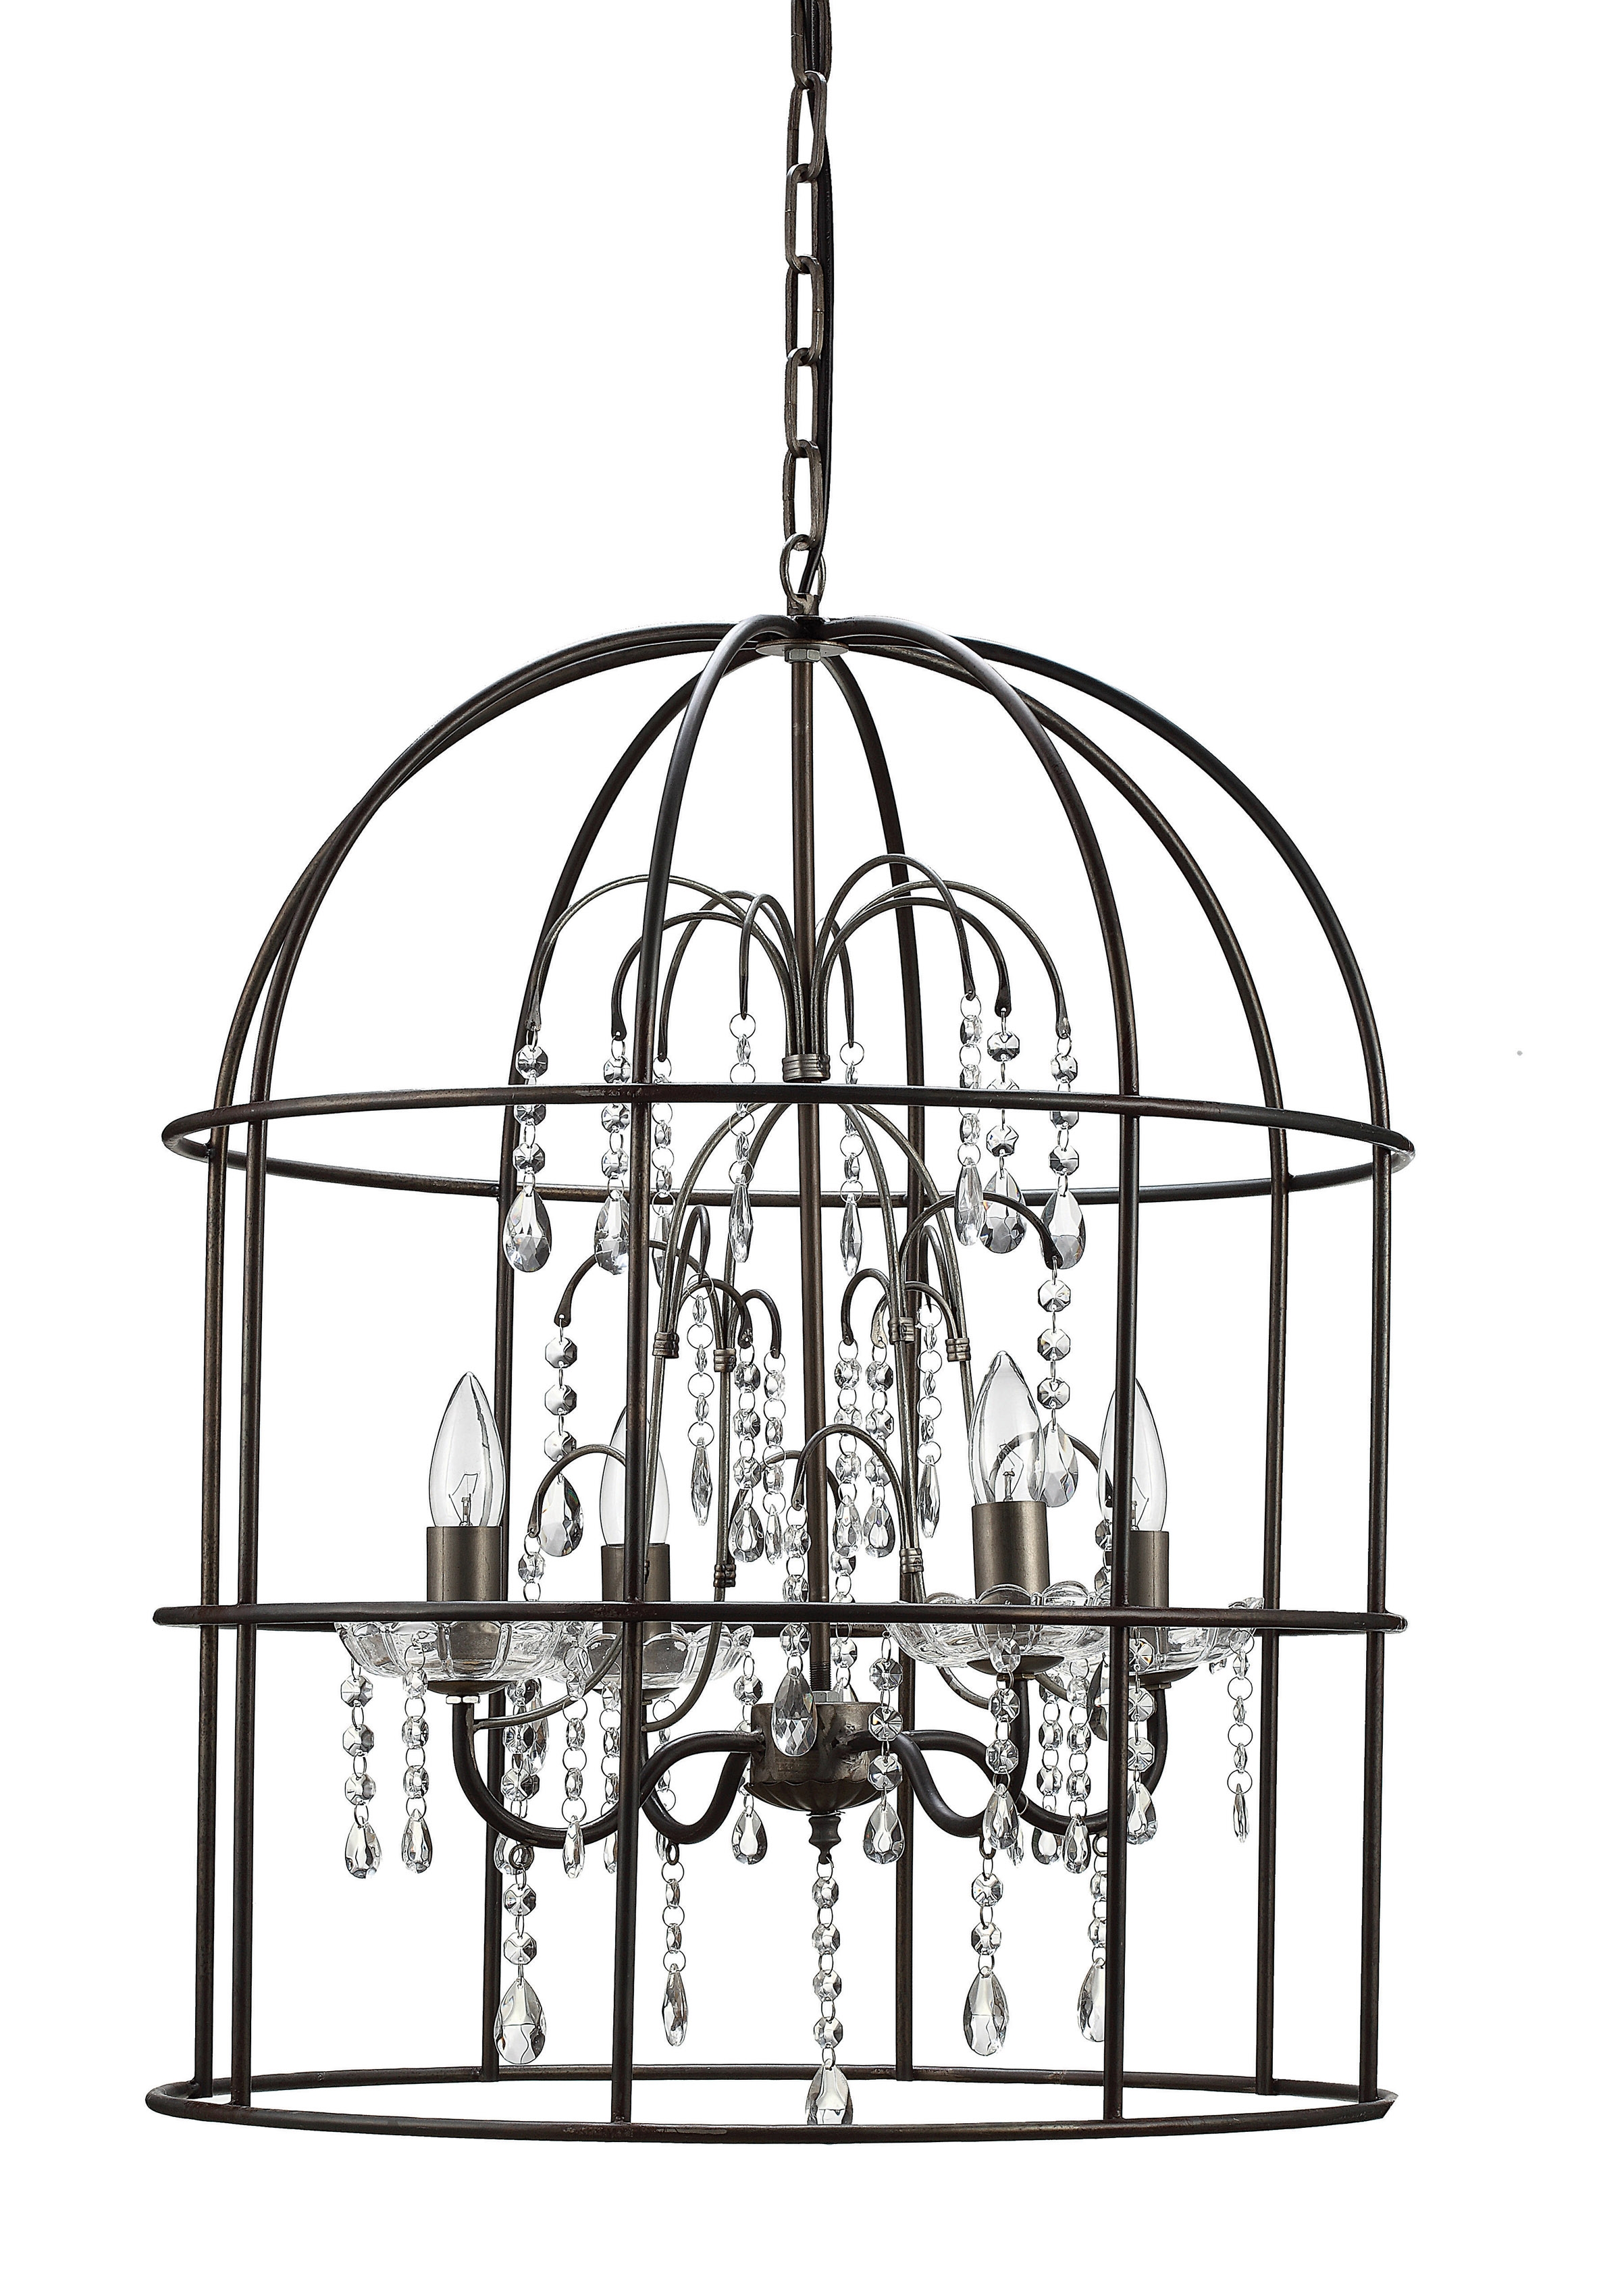 Metal Birdcage Chandelier with 4 Lights & Glass Crystals - Image 0